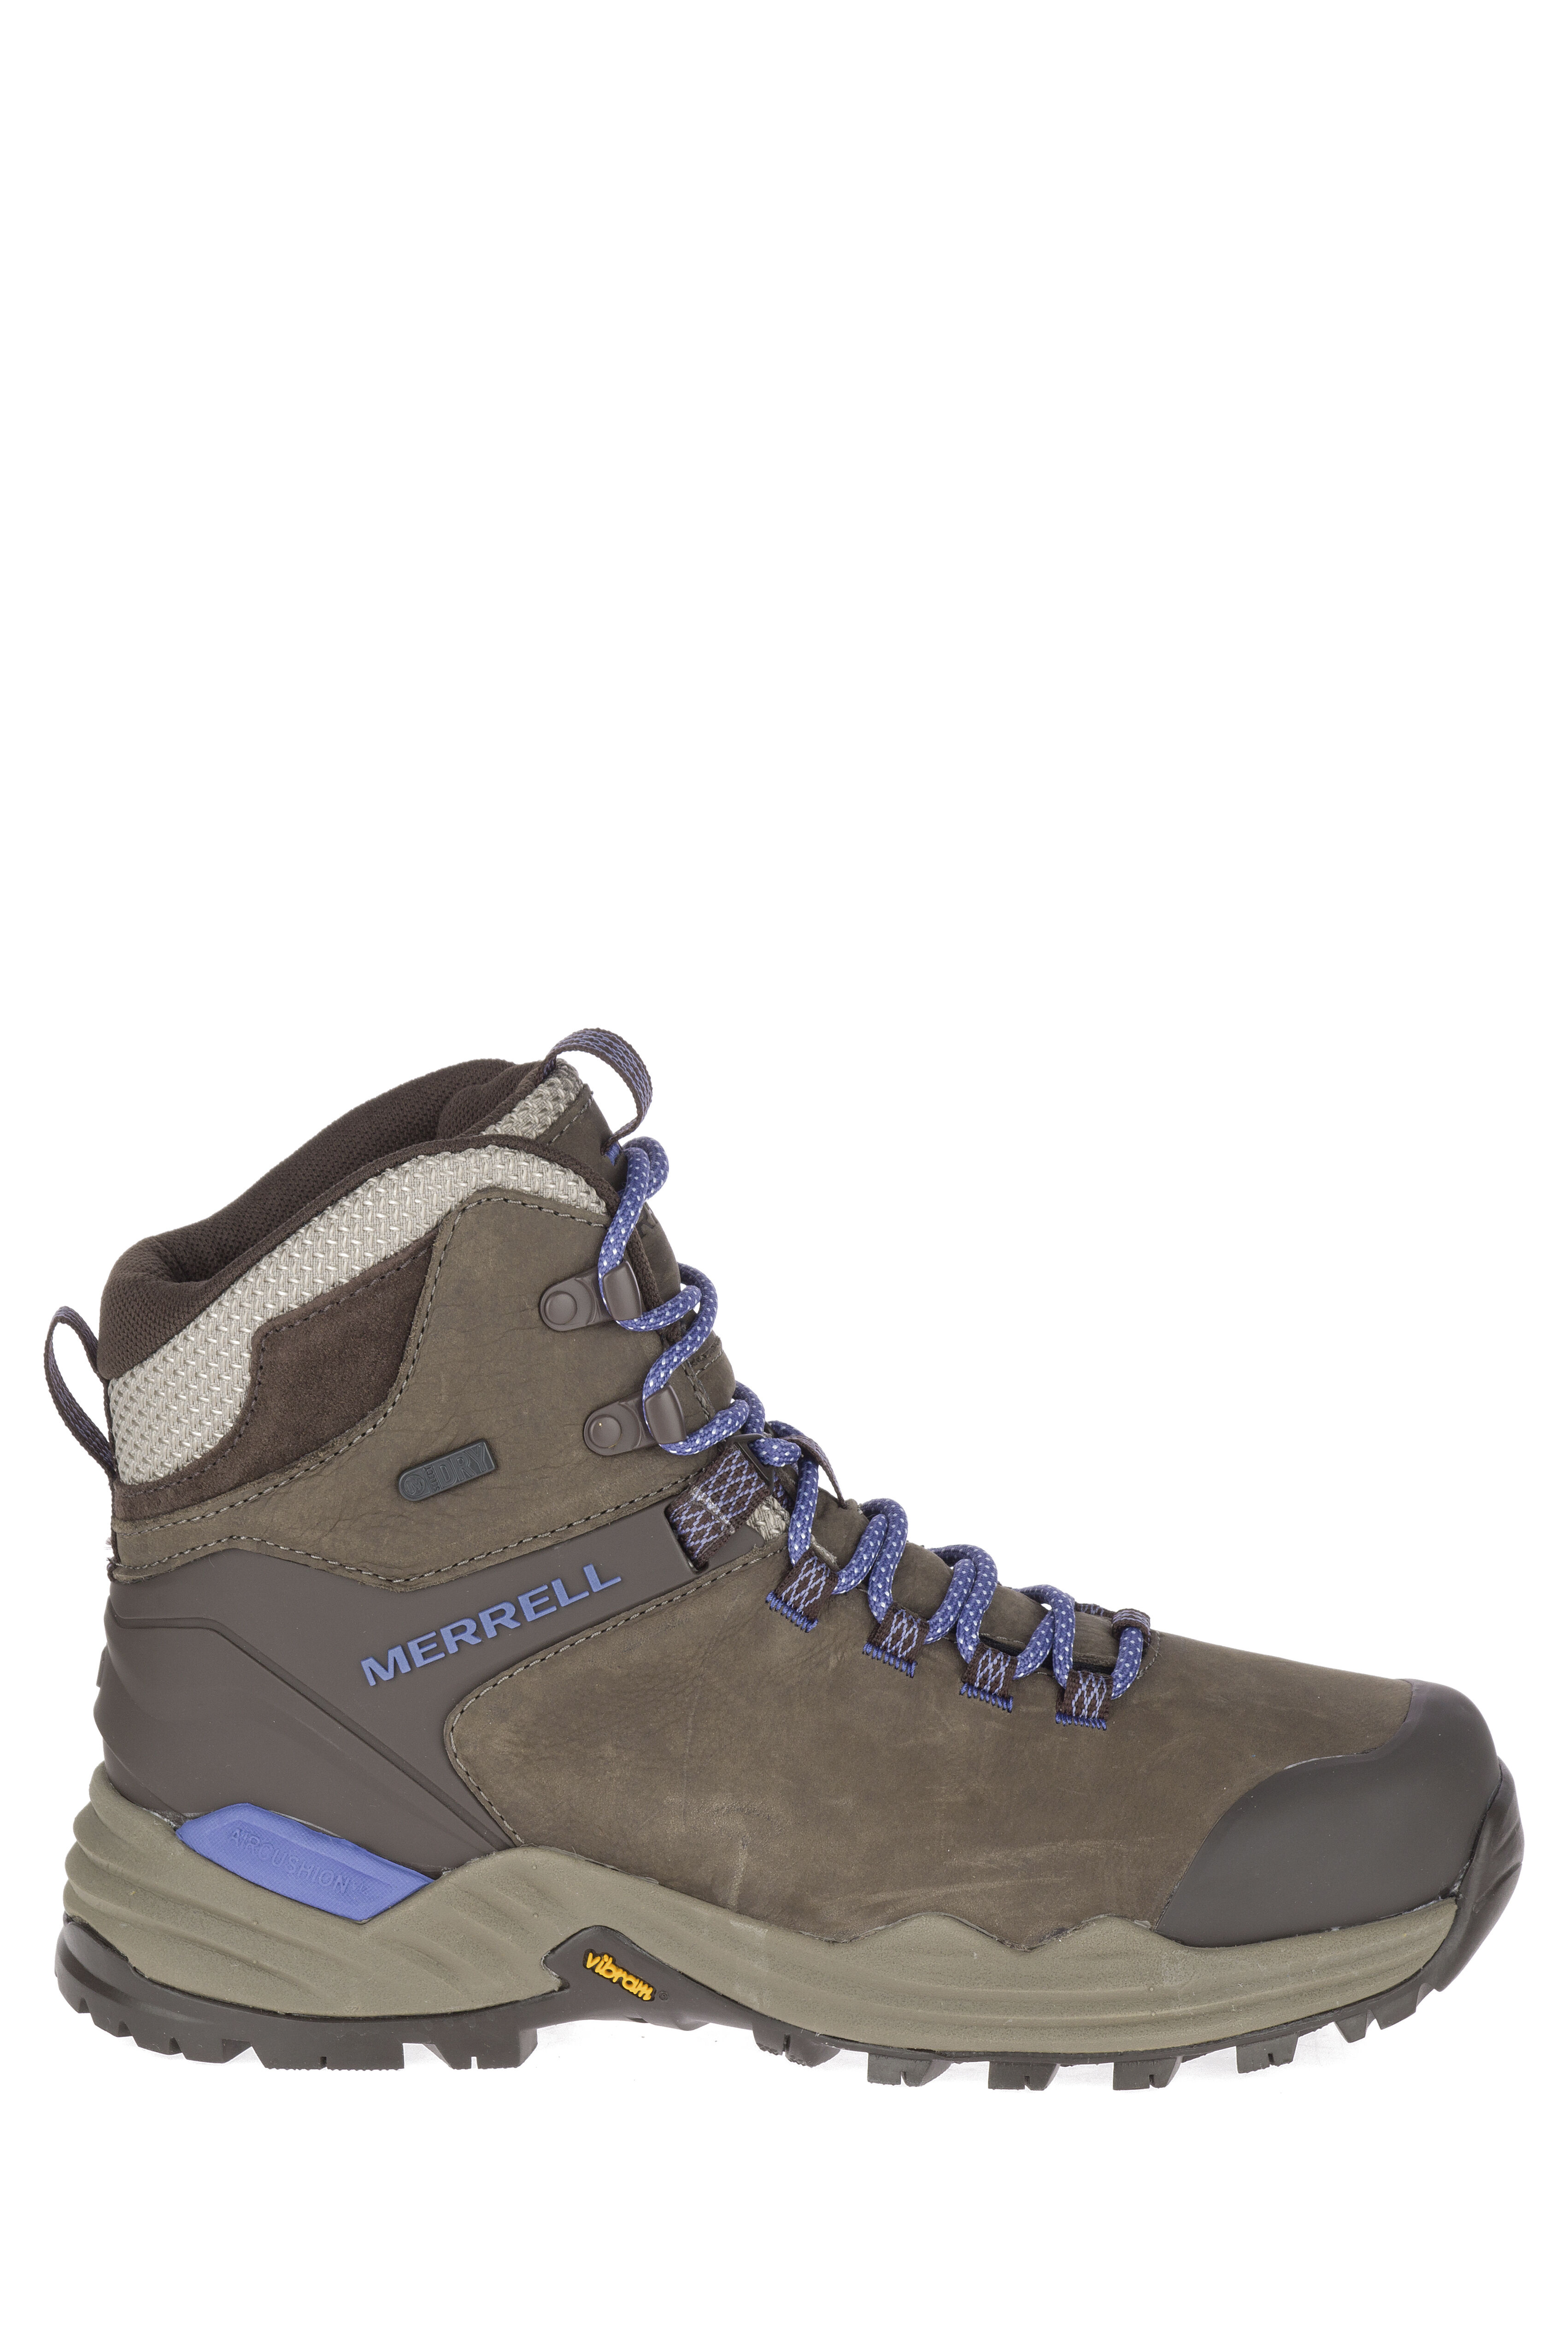 Merrell Phaserbound 2 Tall WP Hiking 